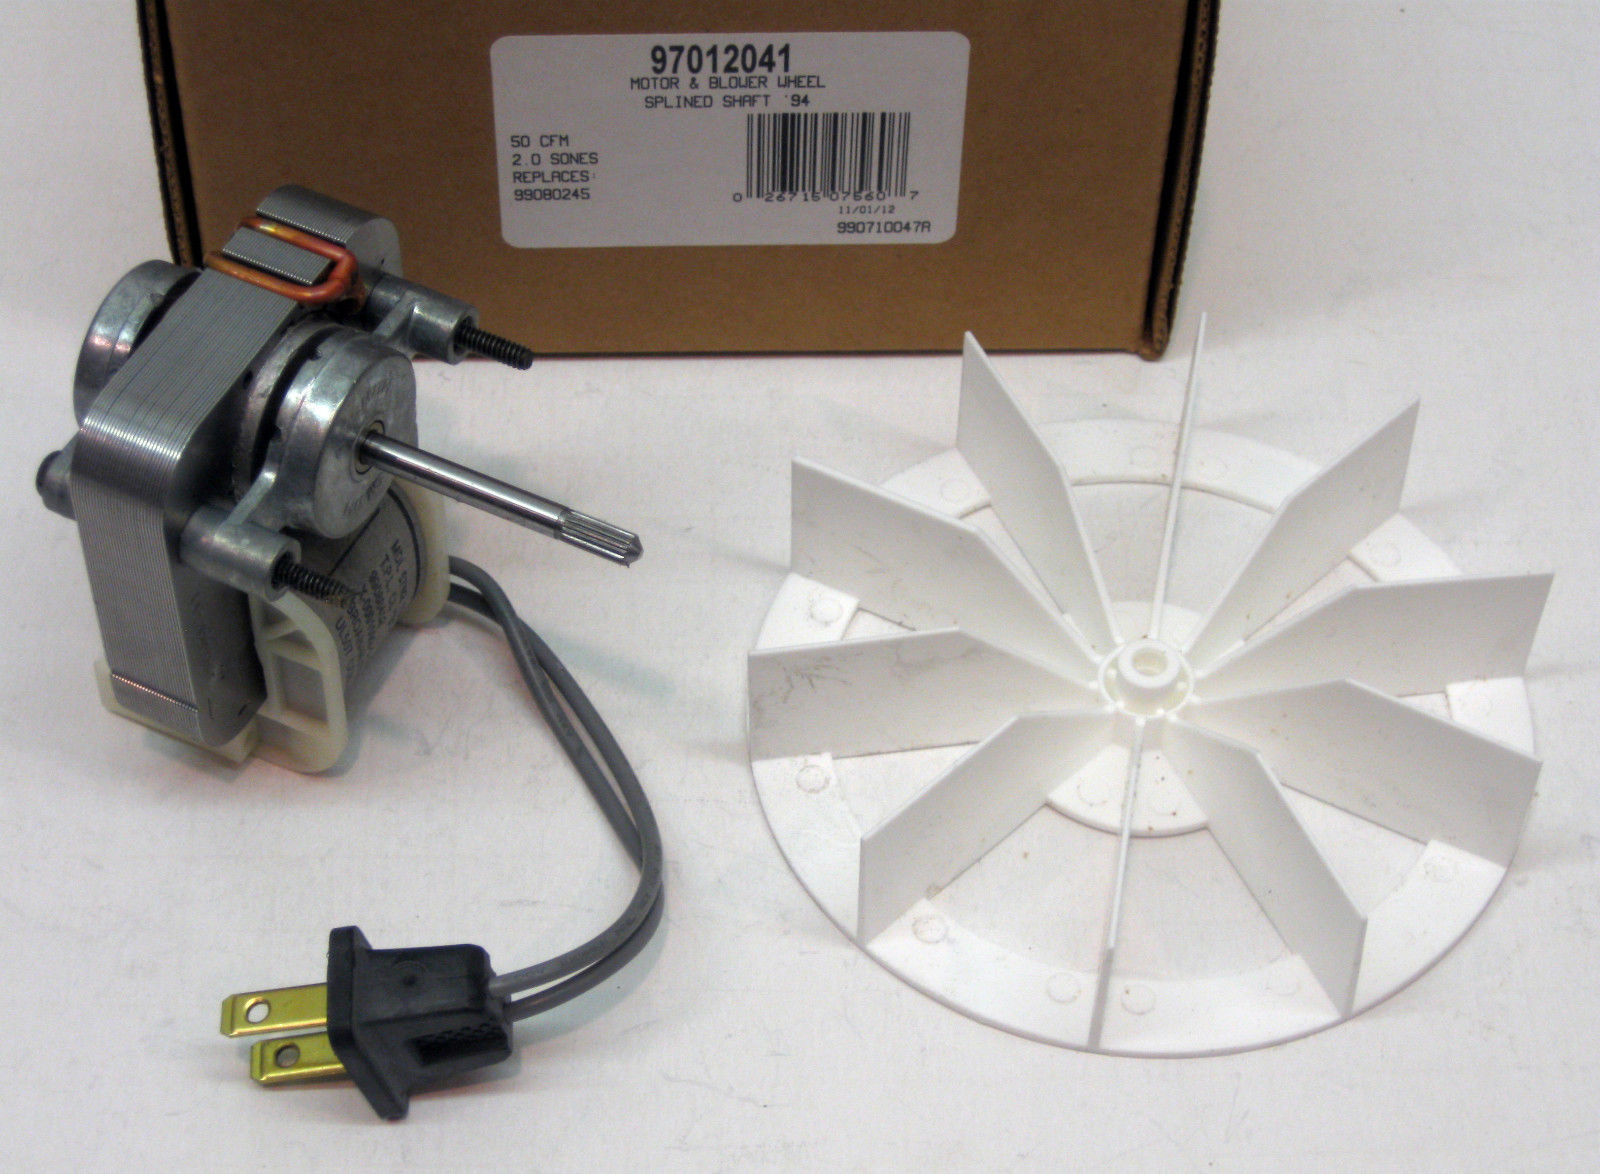 Broan Bathroom Fan Replacement Motor Image Of Bathroom And inside dimensions 1600 X 1174